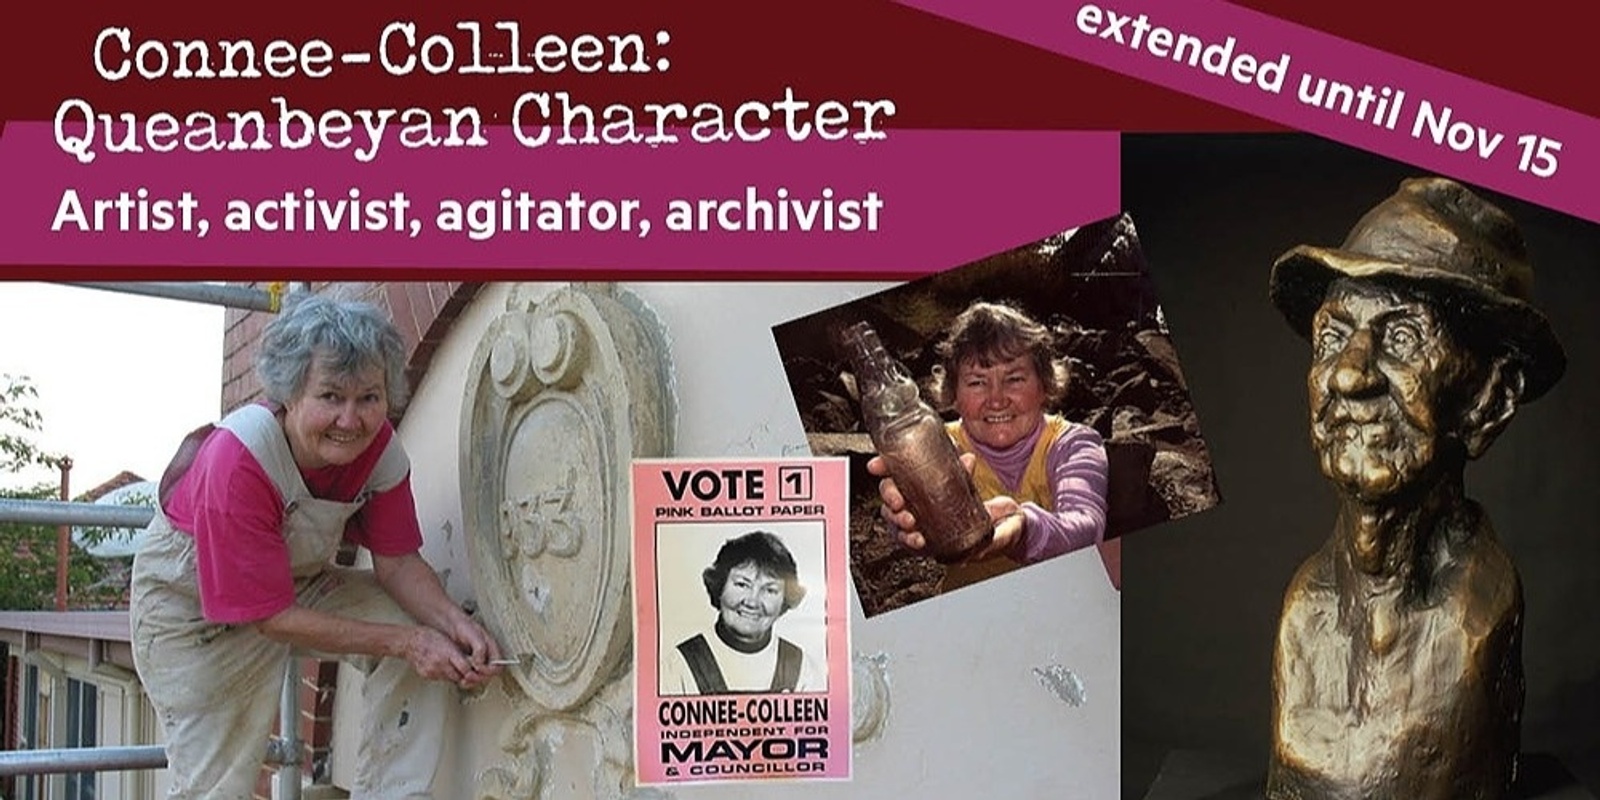 Banner image for Extended one more week - Connee-Colleen: Queanbeyan Character